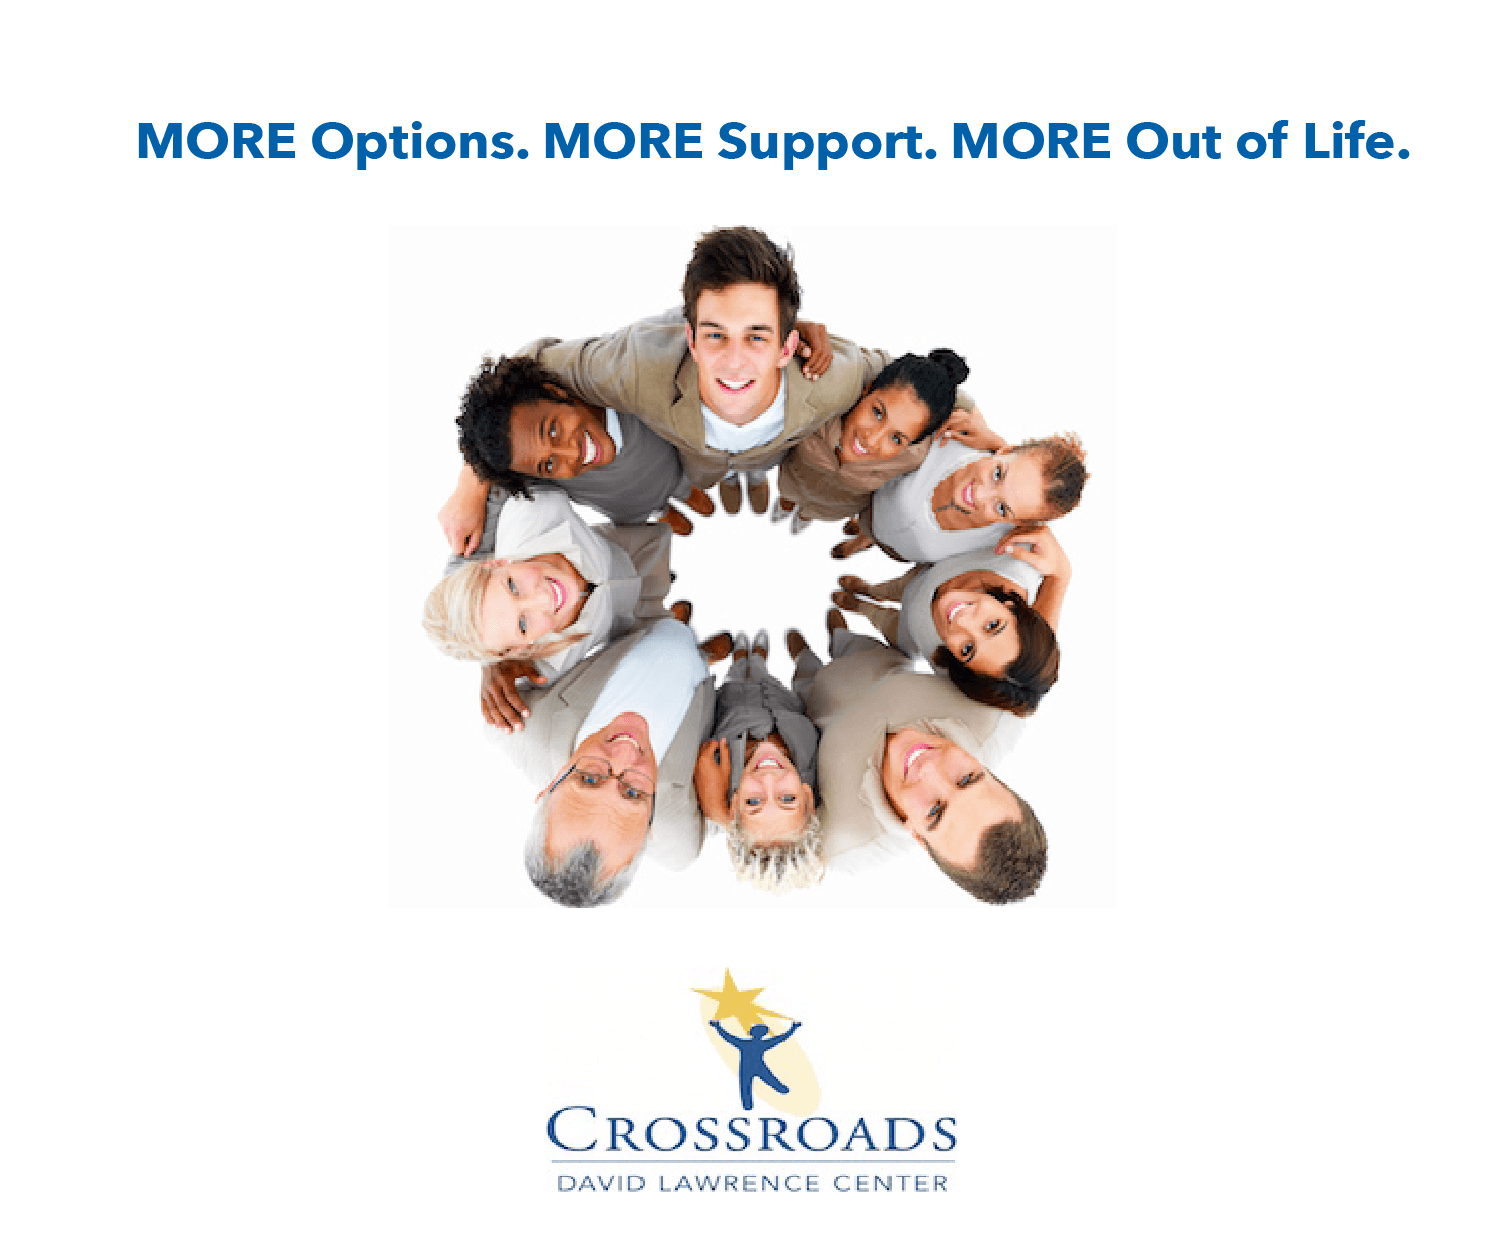 Crossroads Launches New Outpatient Medication-Assisted Treatment Program to Fight Opioid Addiction